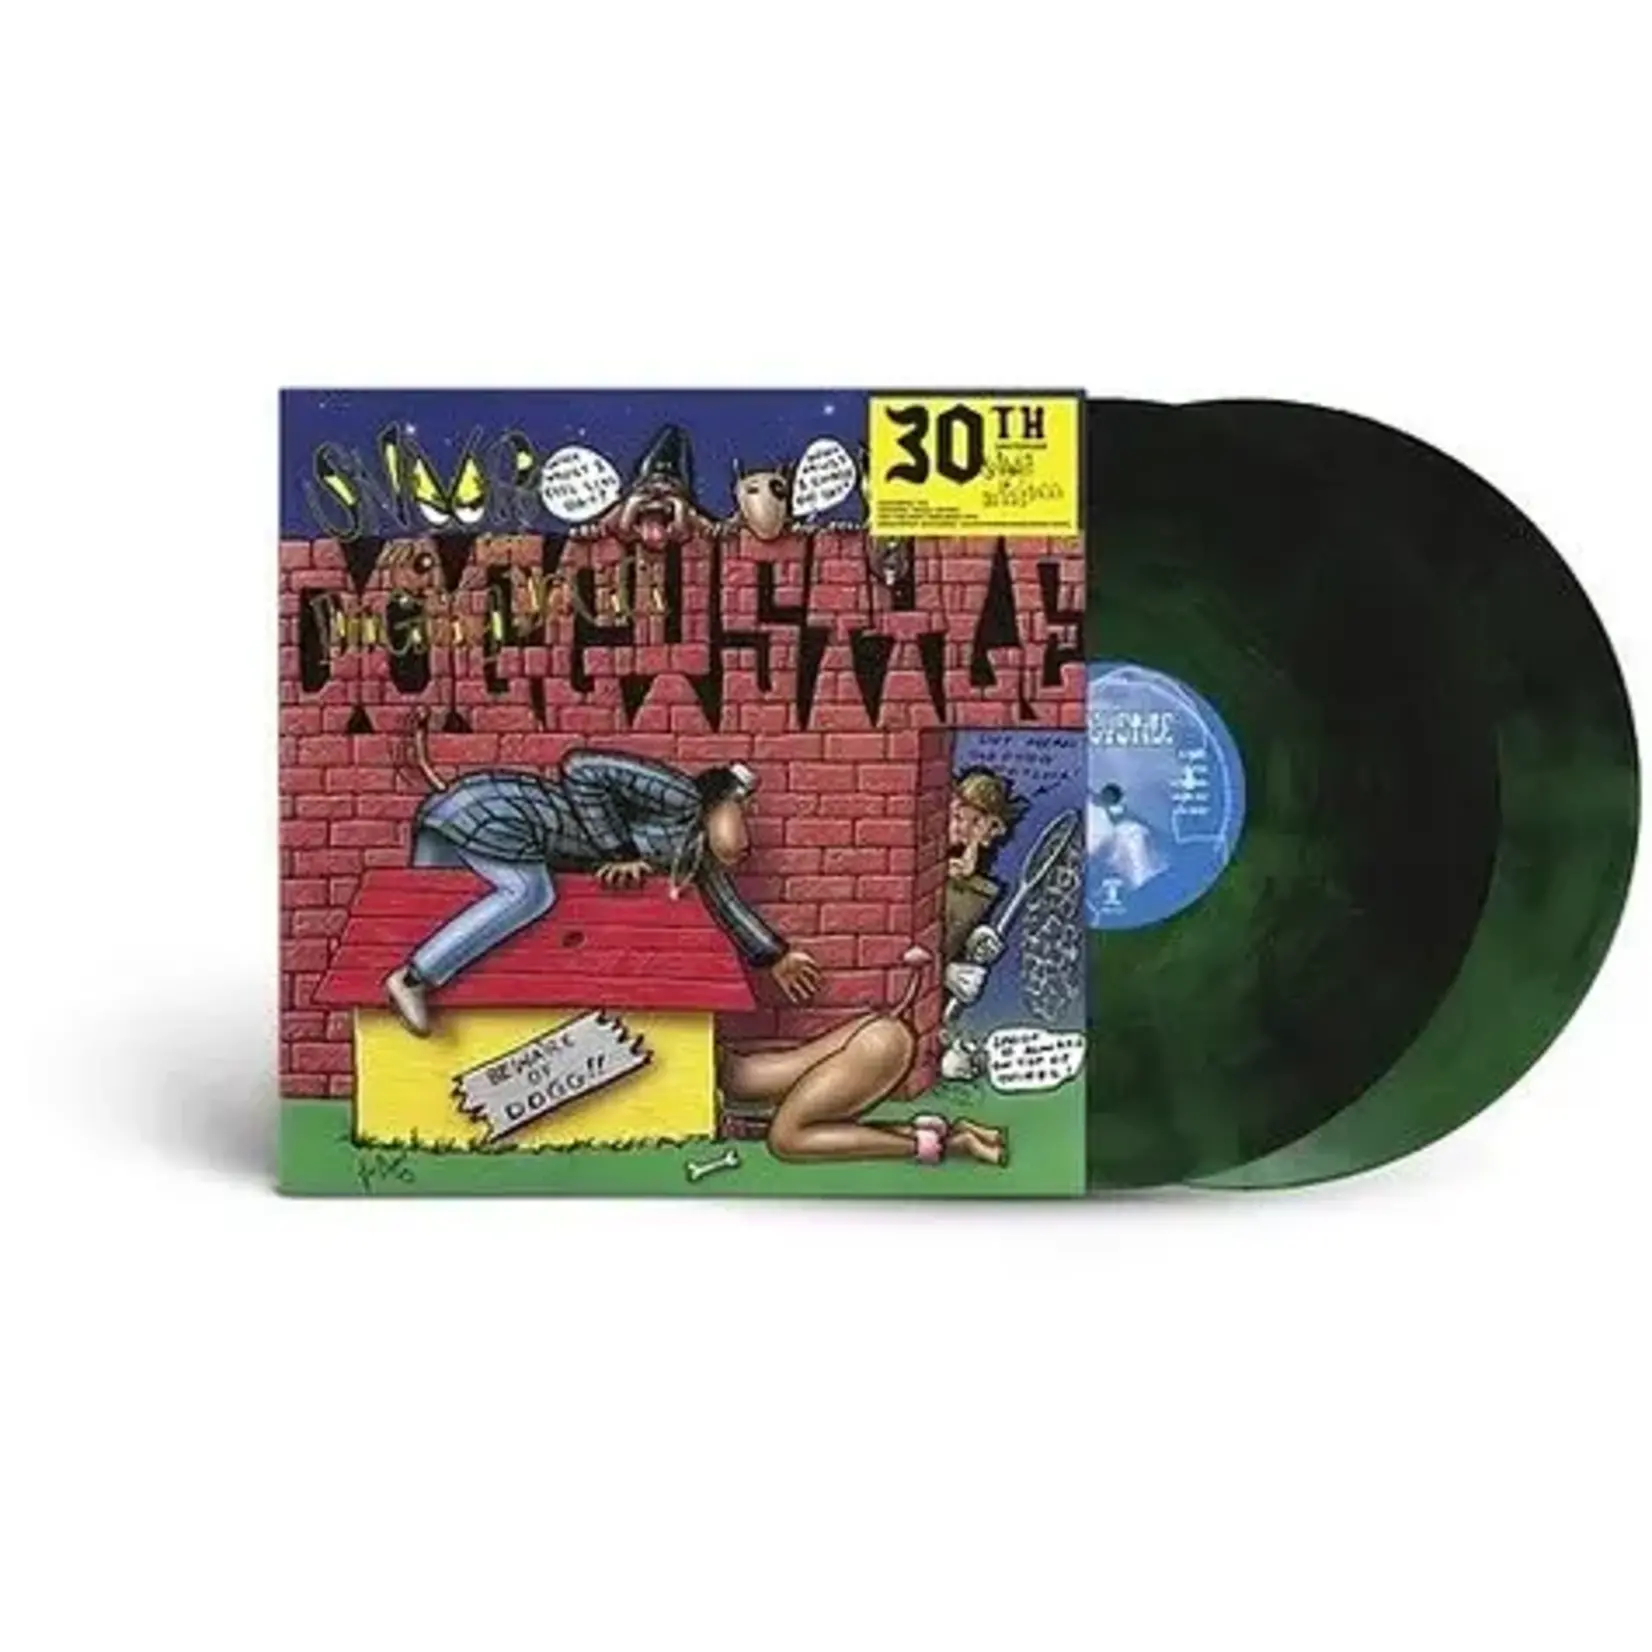 [New] Snoop Doggy Dogg - Doggystyle (2LP, indie exclusive, green & black smoke coloured vinyl)